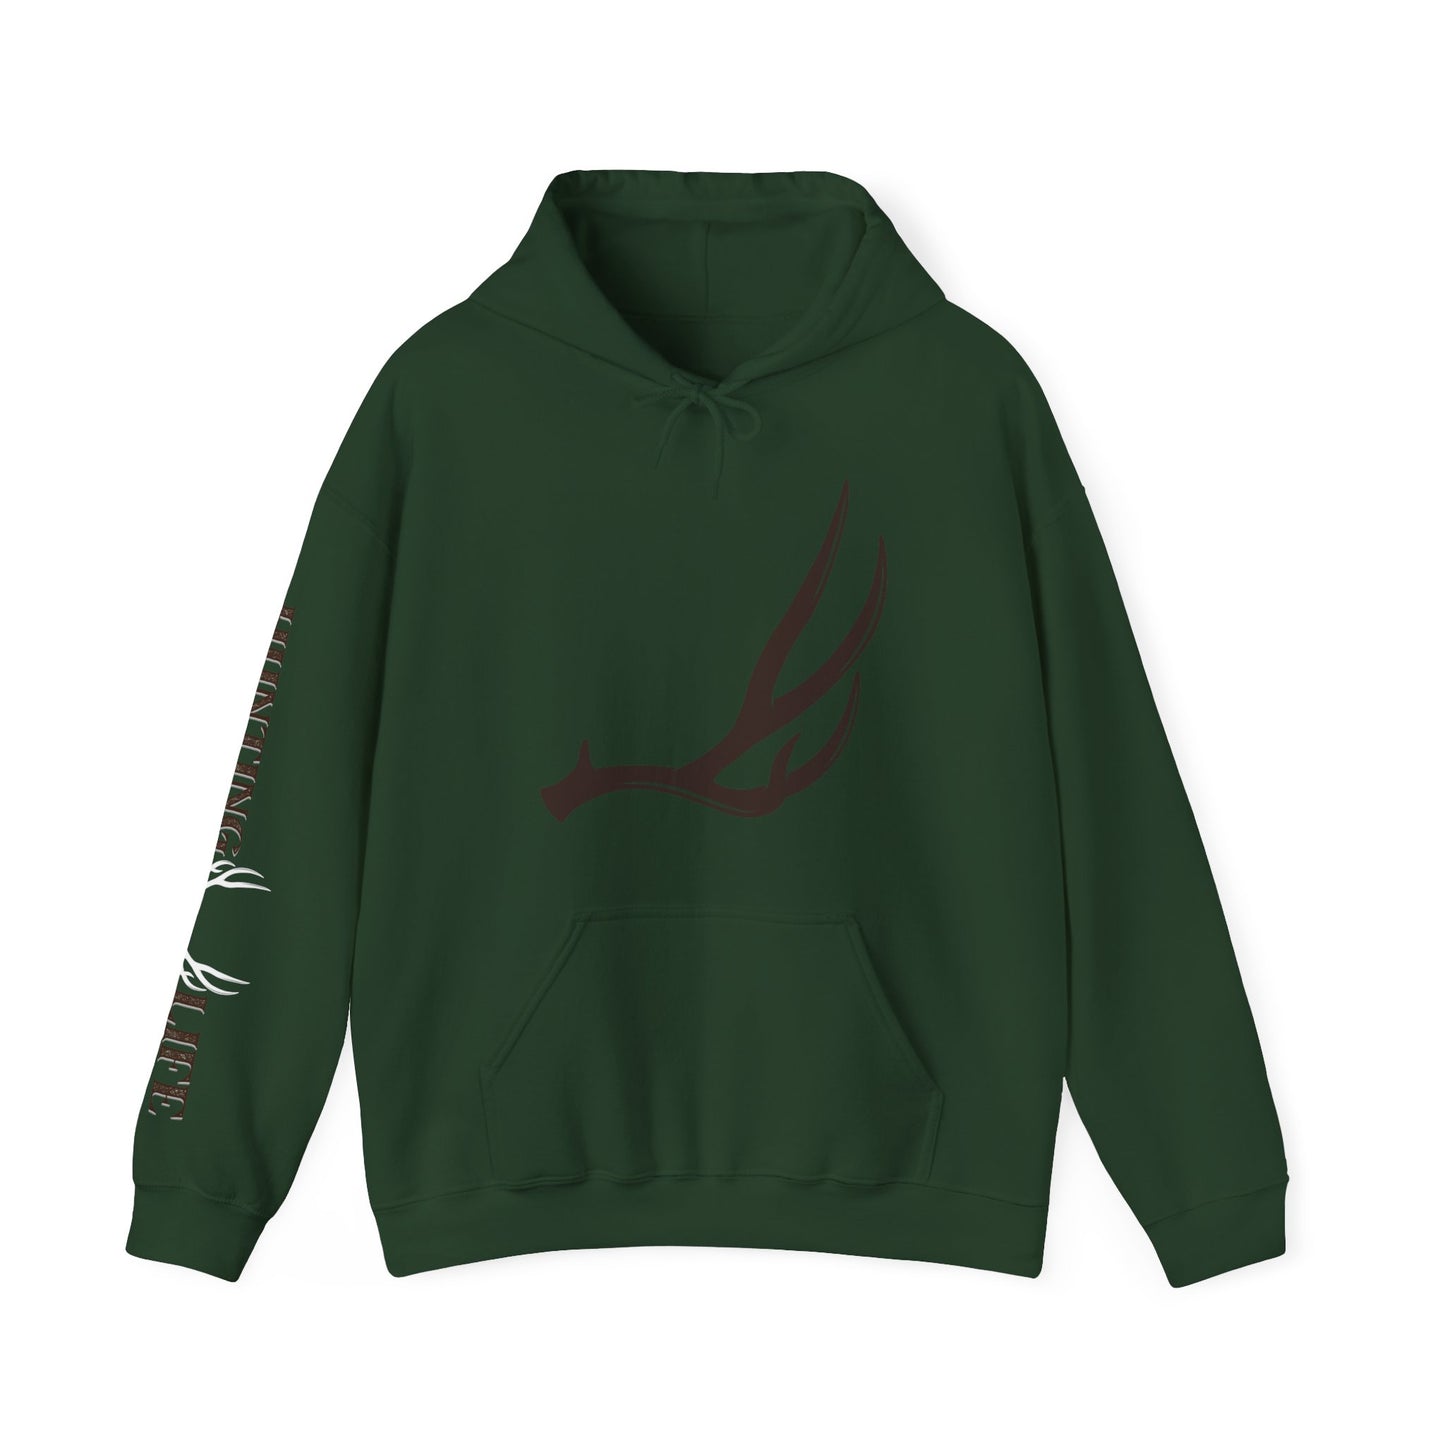 The Muley Shed Hoodie